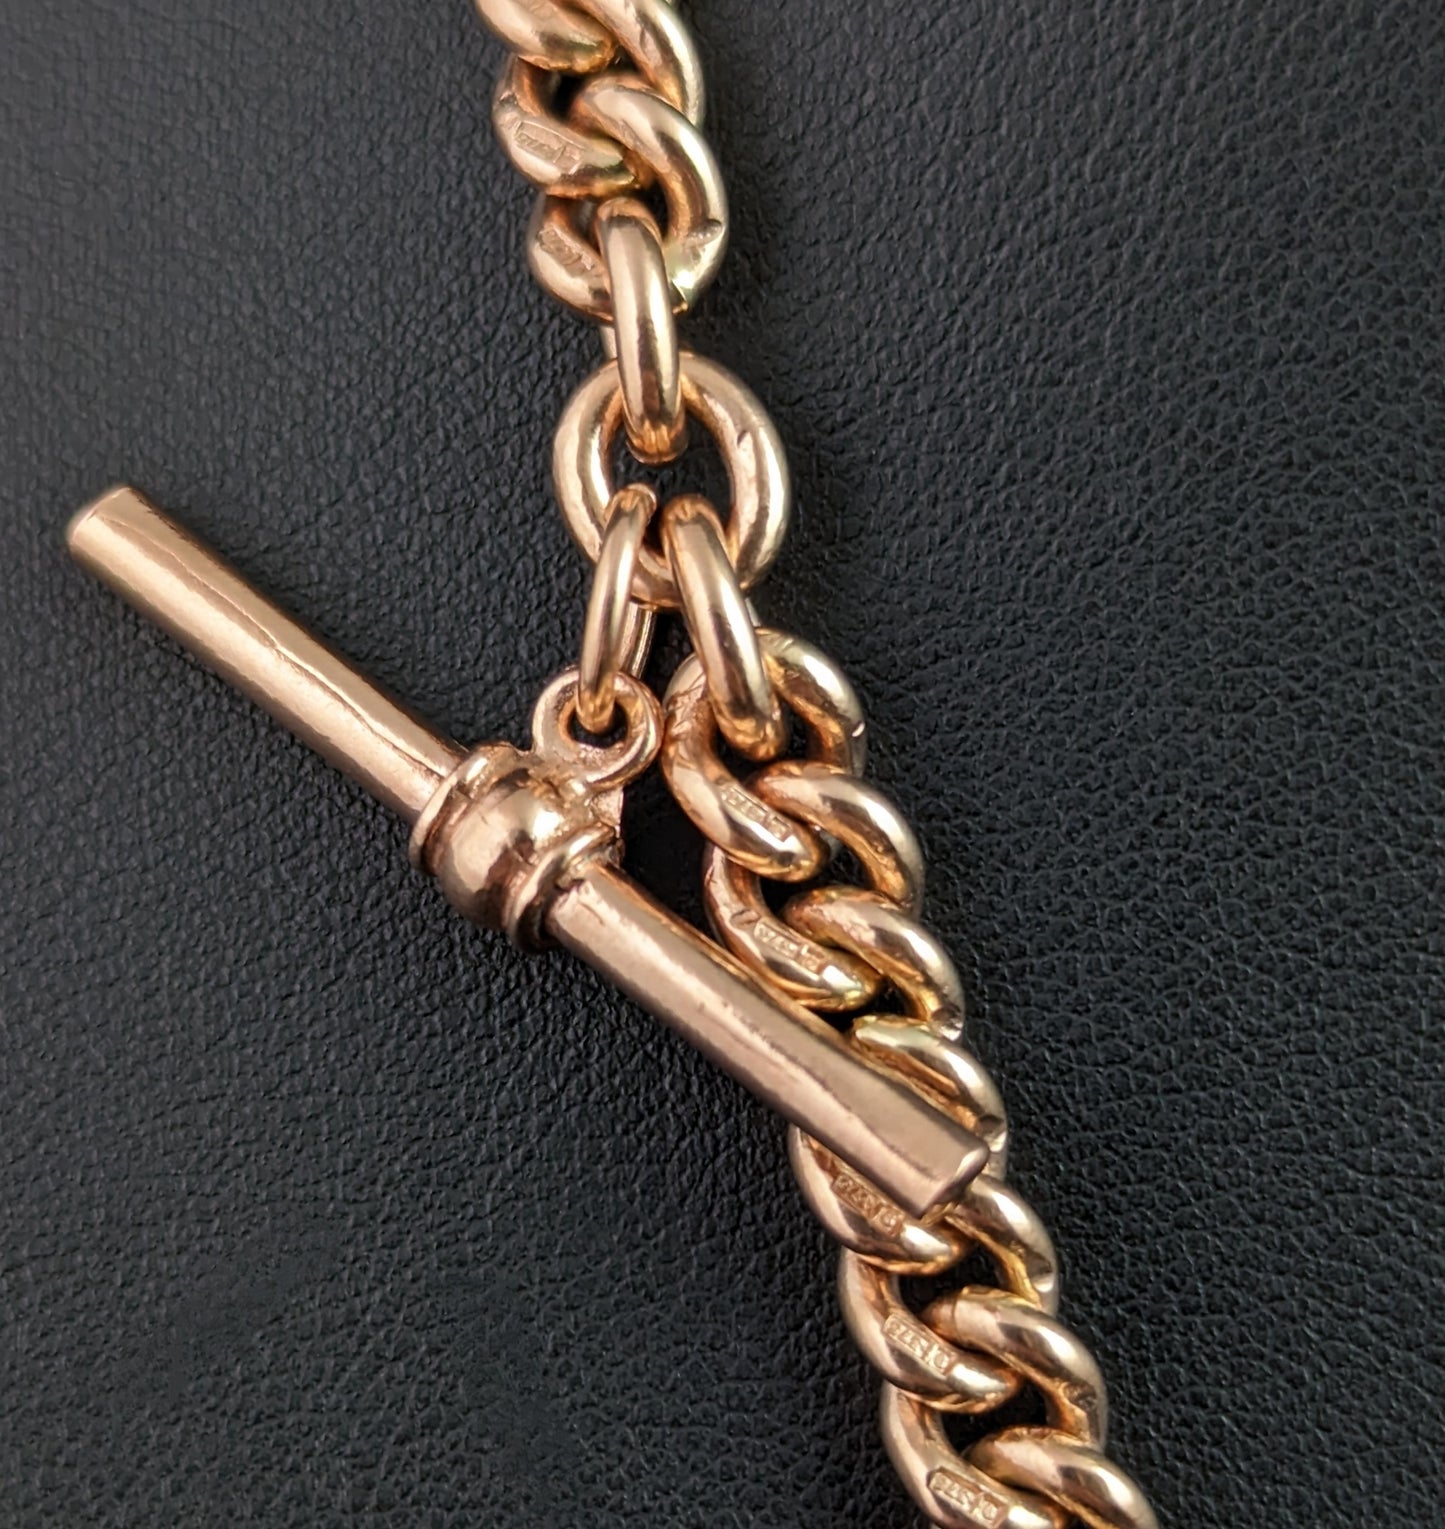 Antique 9ct Rose gold Albert chain, curb link, watch chain, Necklace, Heavy